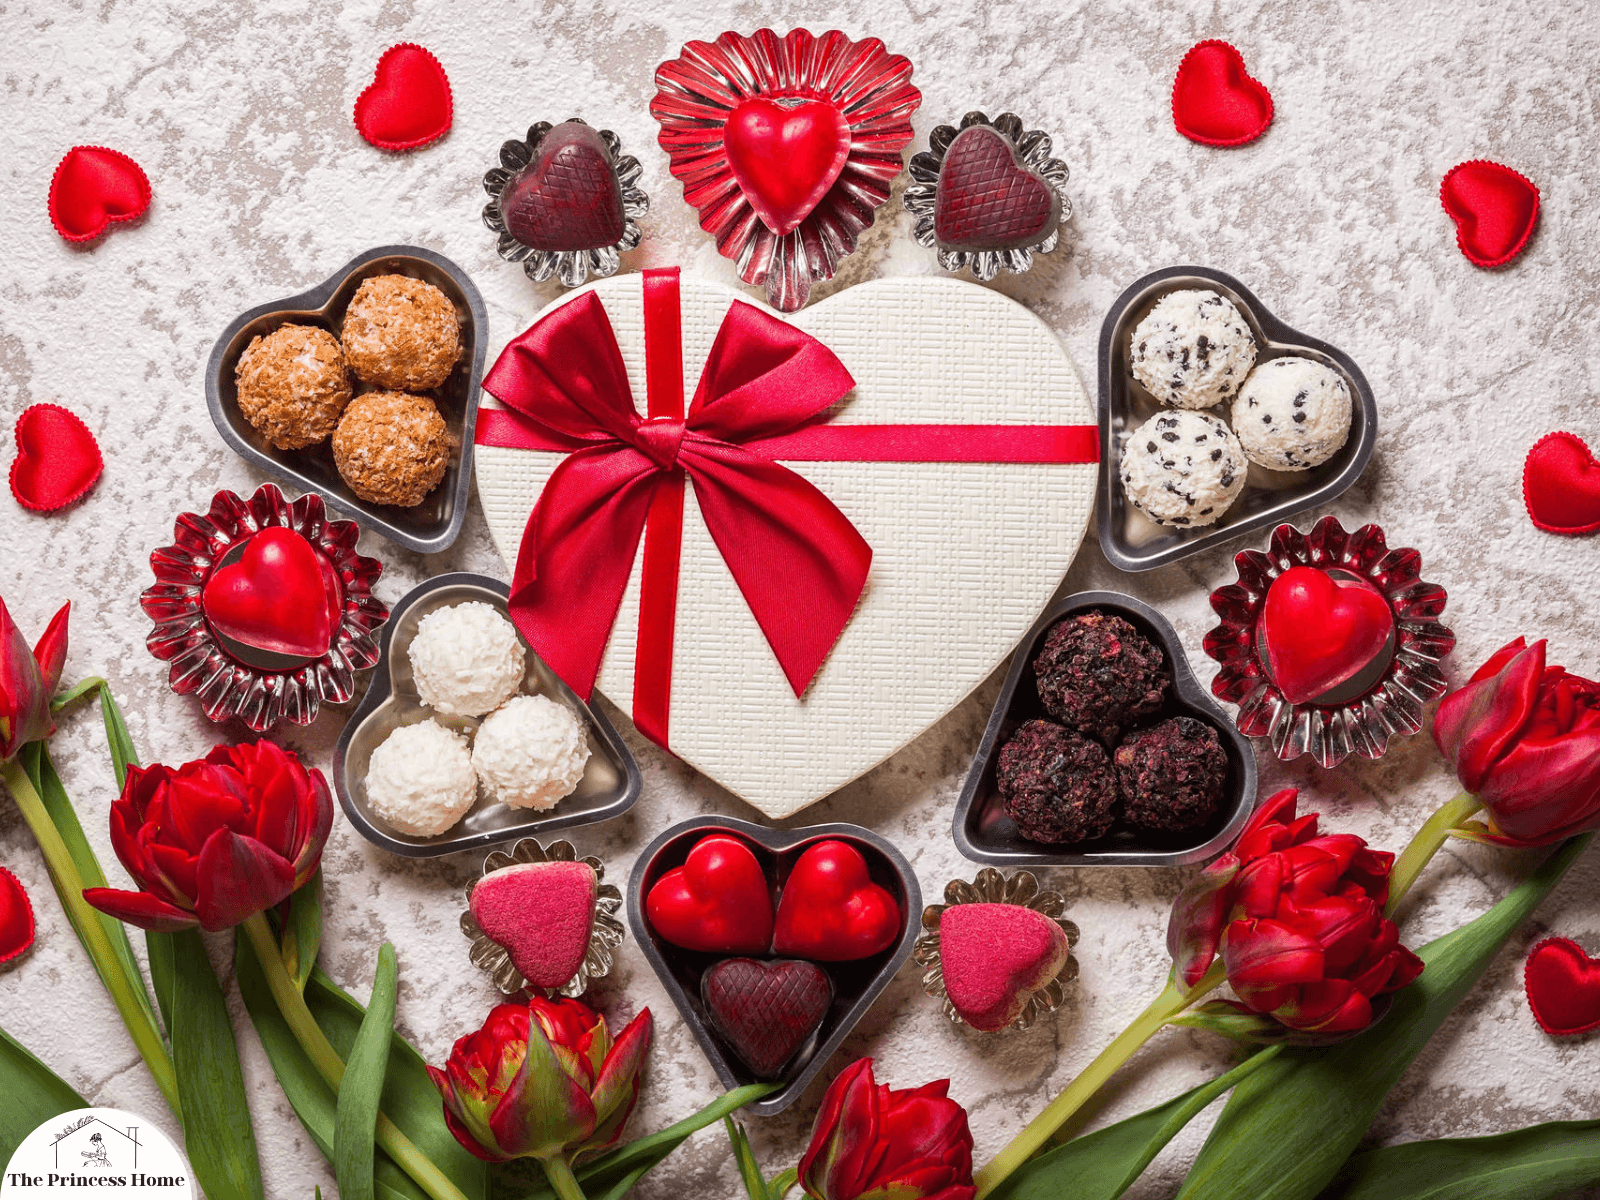 4.Assorted Chocolates and Truffles: